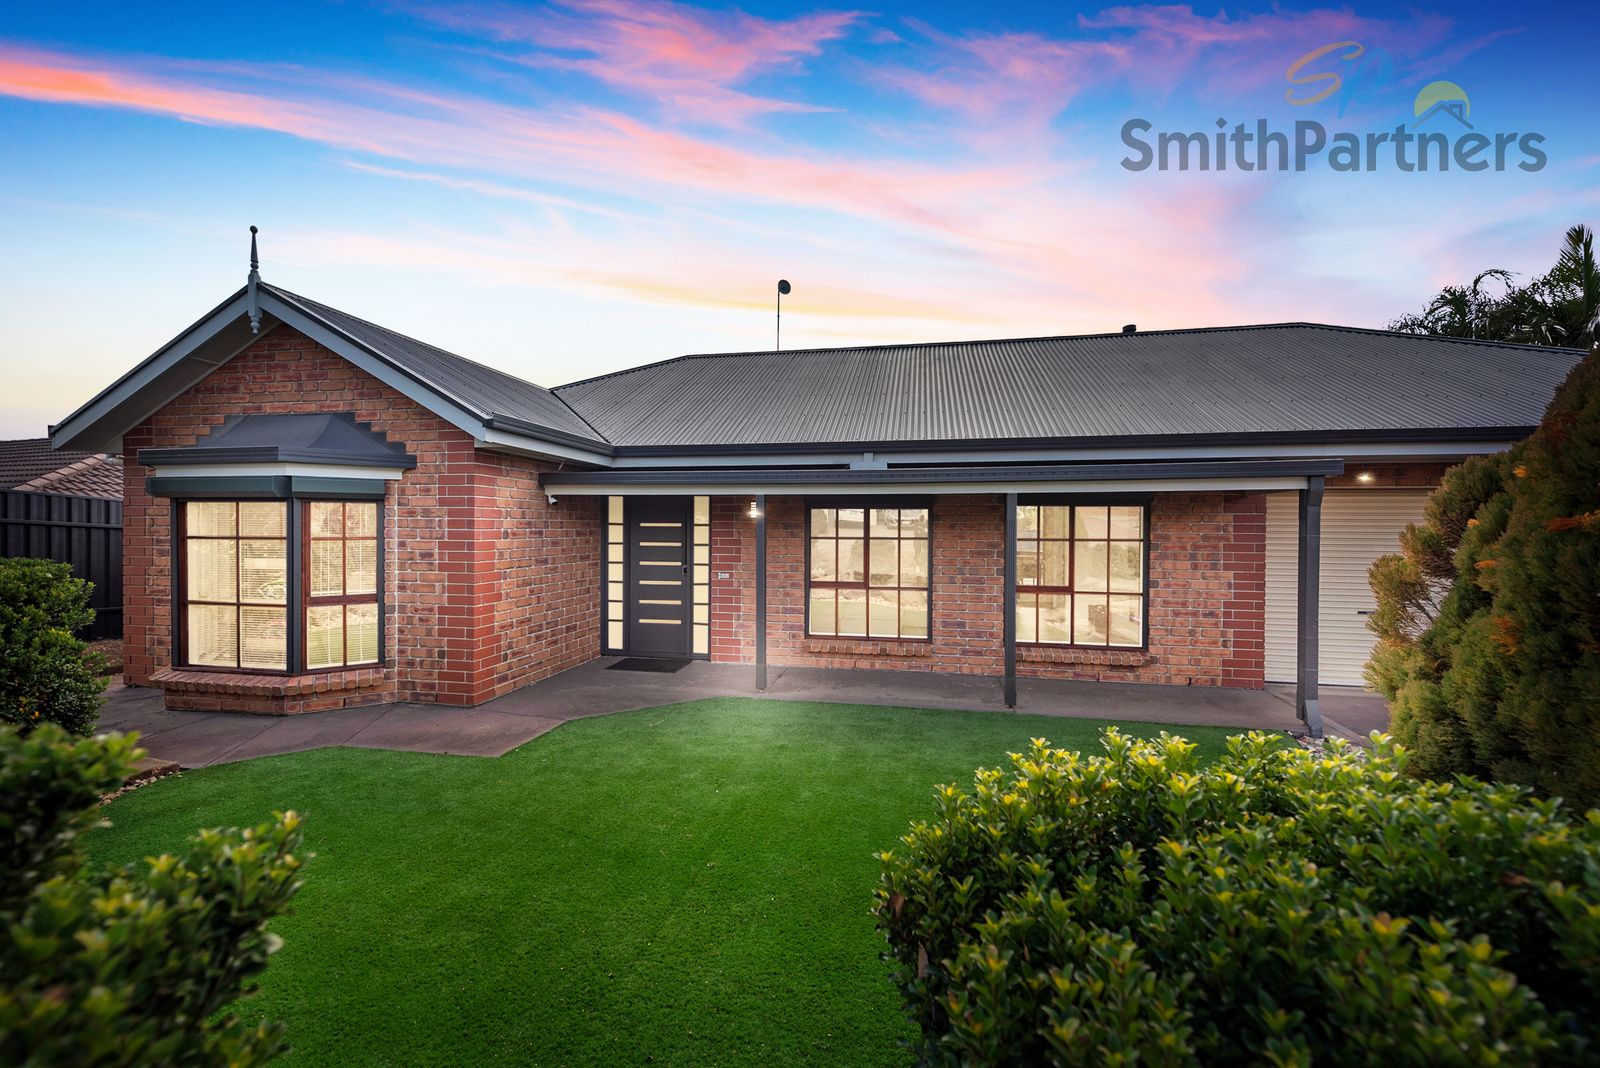 4 bedrooms House in 10 Keith Lewis Court WYNN VALE SA, 5127